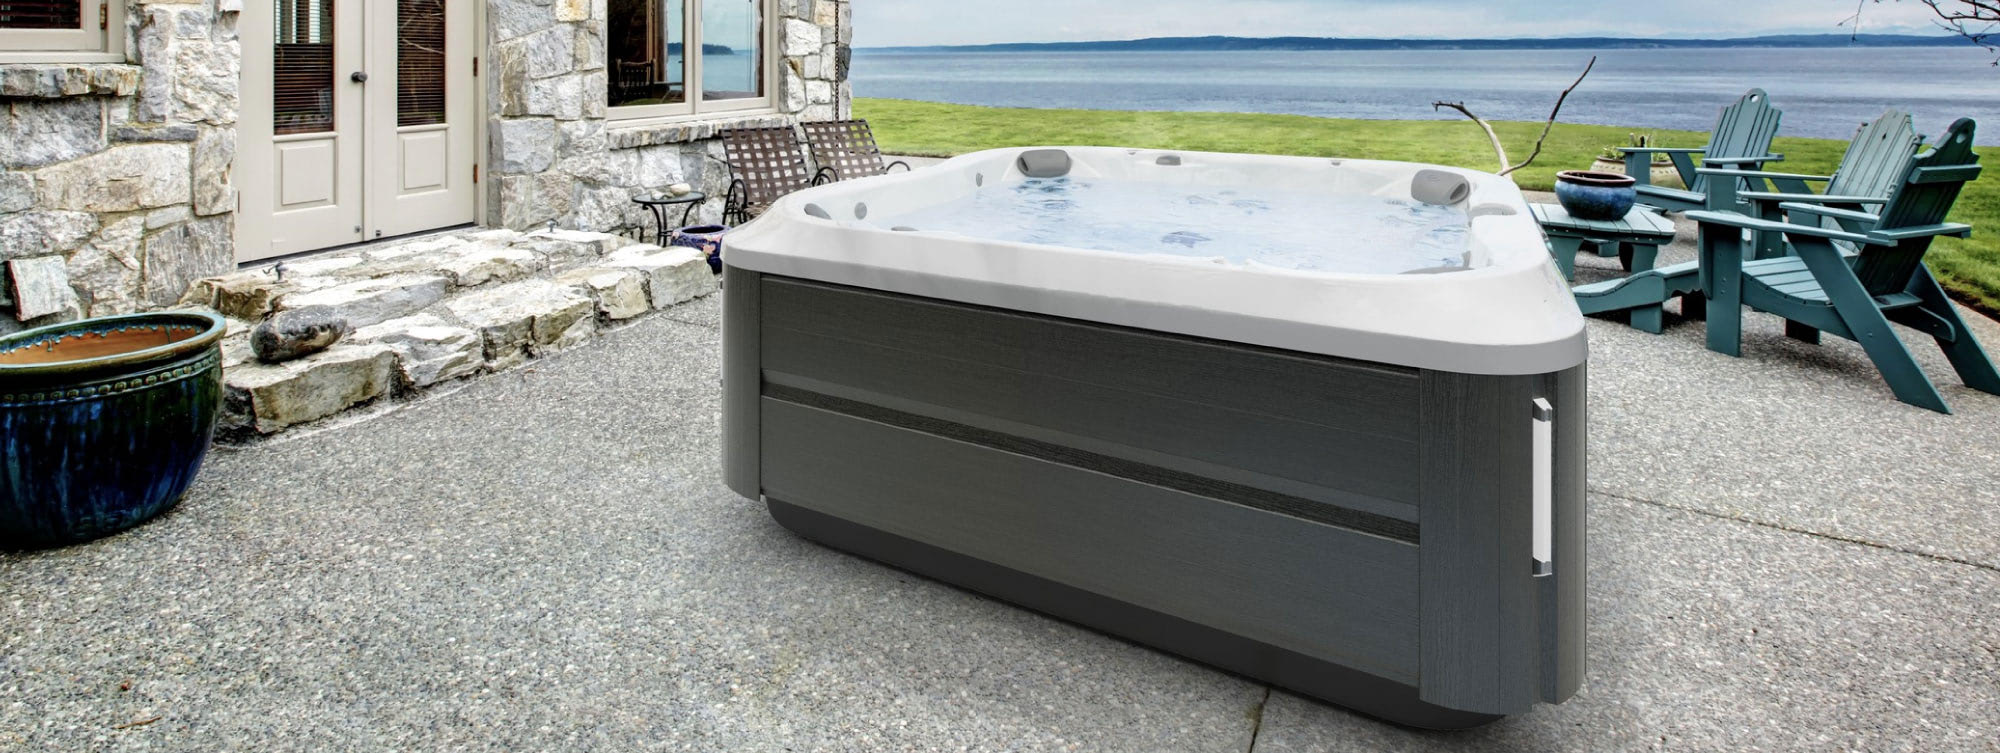 Hot Tub for Every Lifestyle and Budget